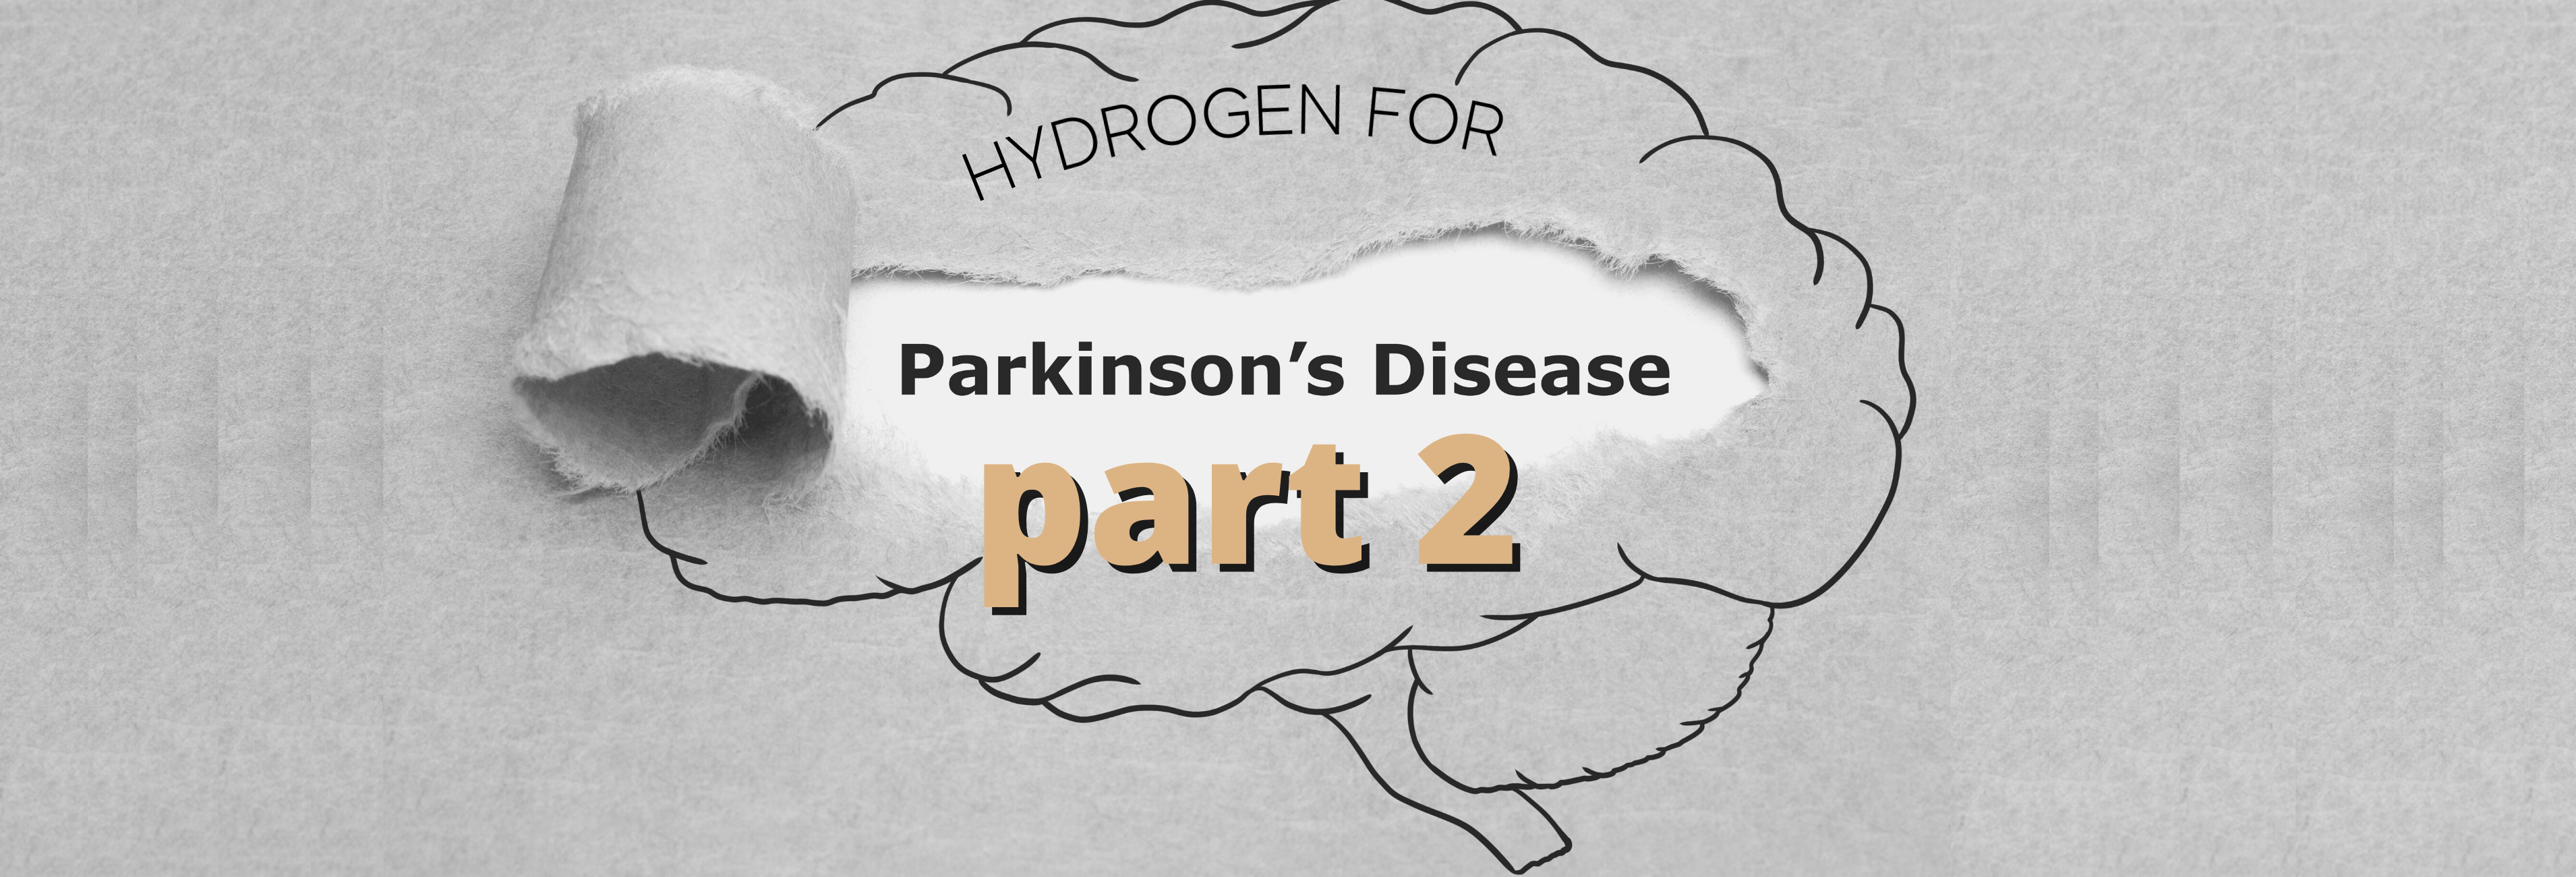 Hydrogen Therapy's Medical Potential for Parkinson's Disease.